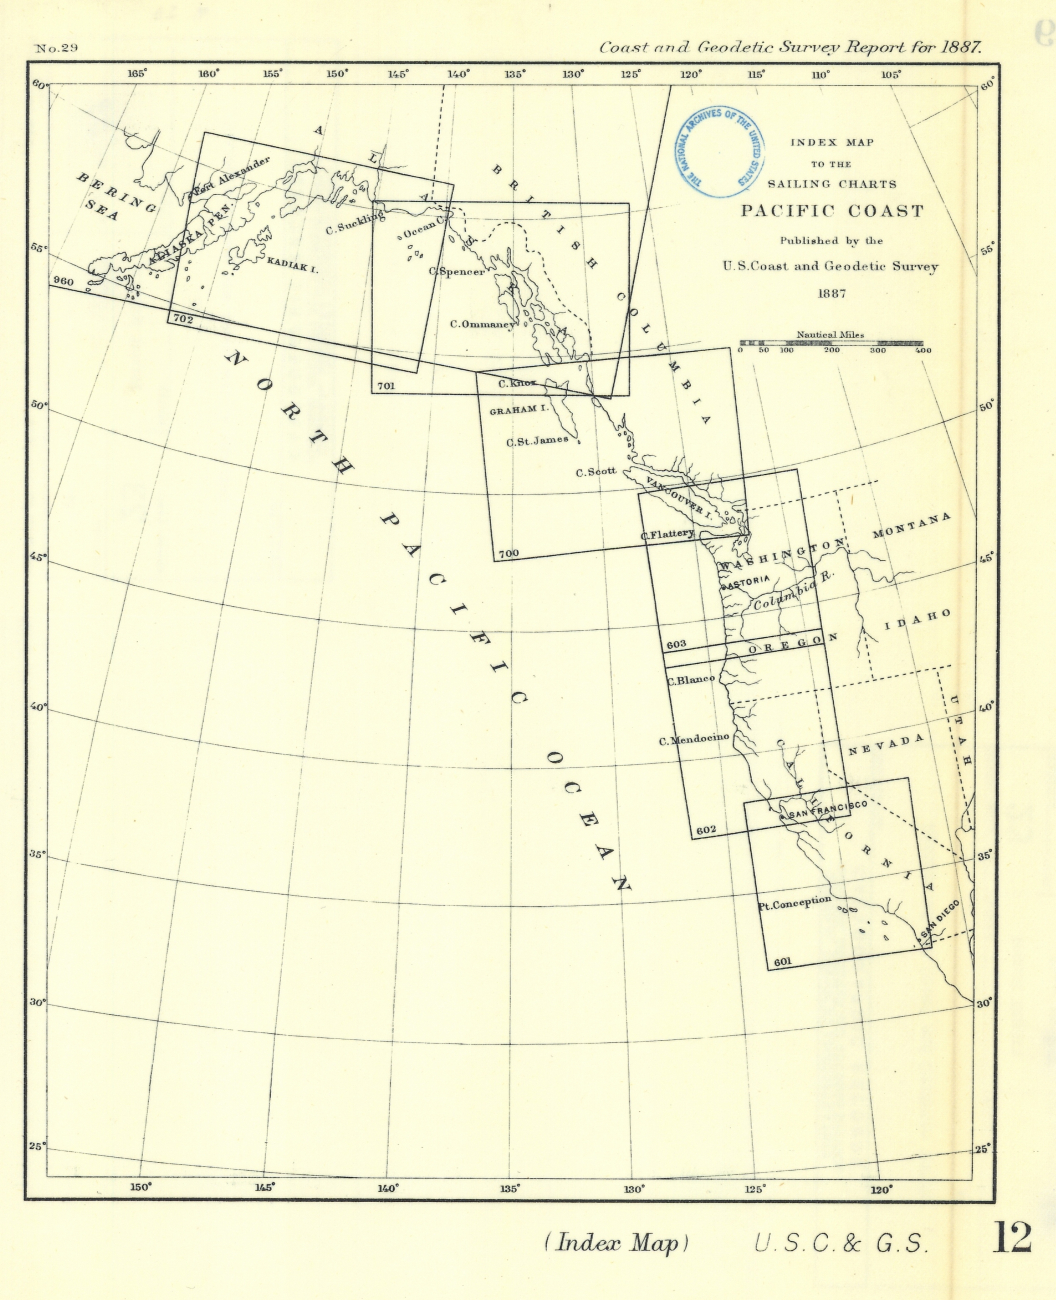 Index Map to the Sailing Charts Pacific CoastPublished by the U